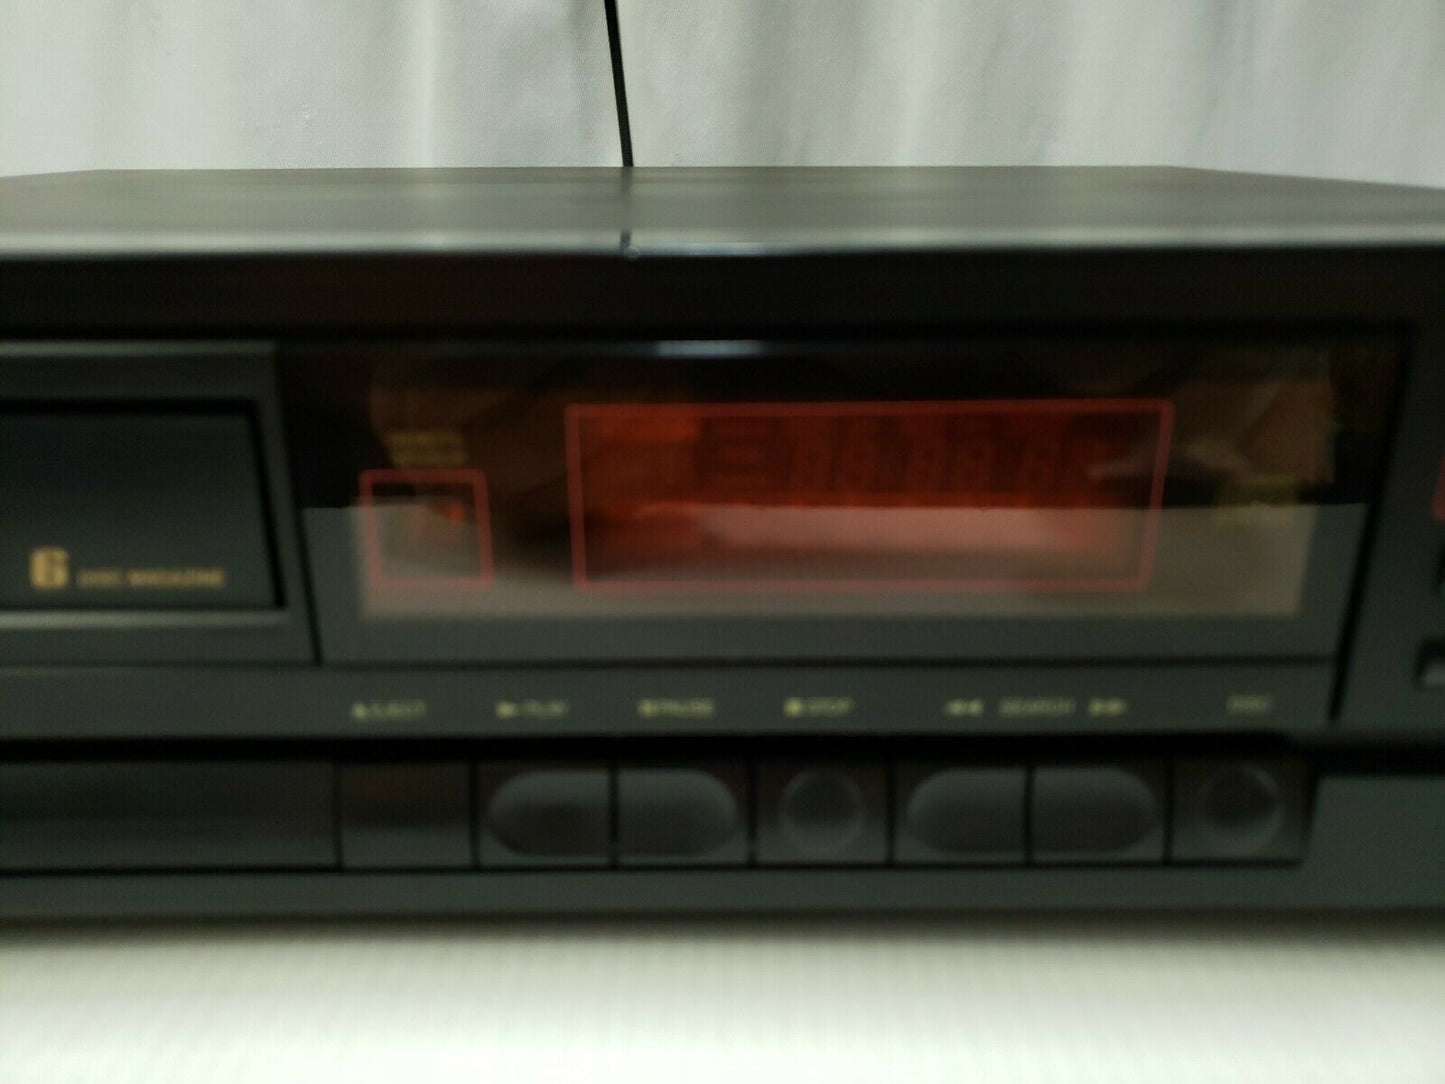 Carrera cd-3400R 6 Disc CD Player Vintage Tested